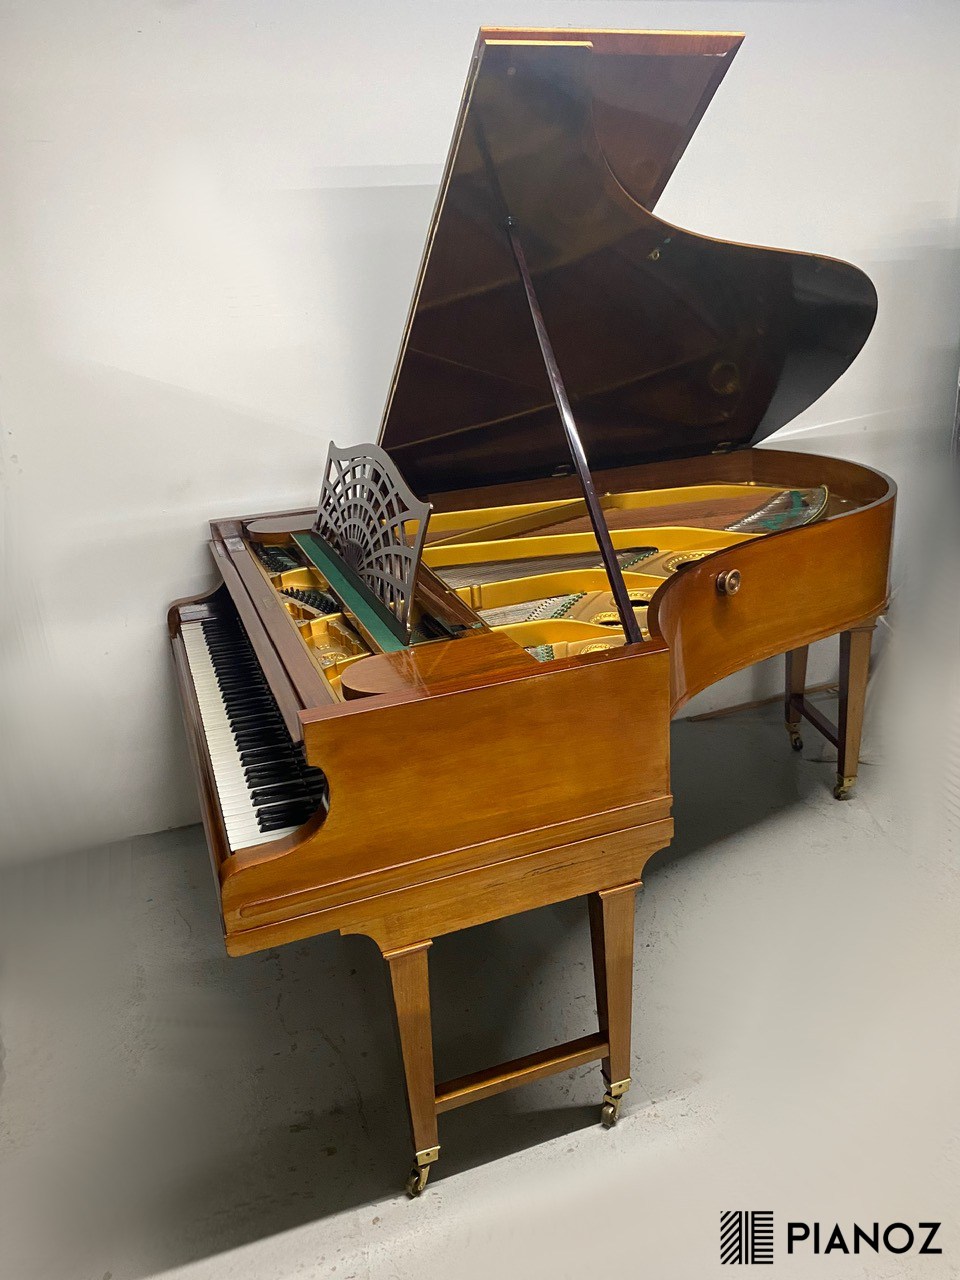 C. Bechstein Model B Grand Piano piano for sale in UK